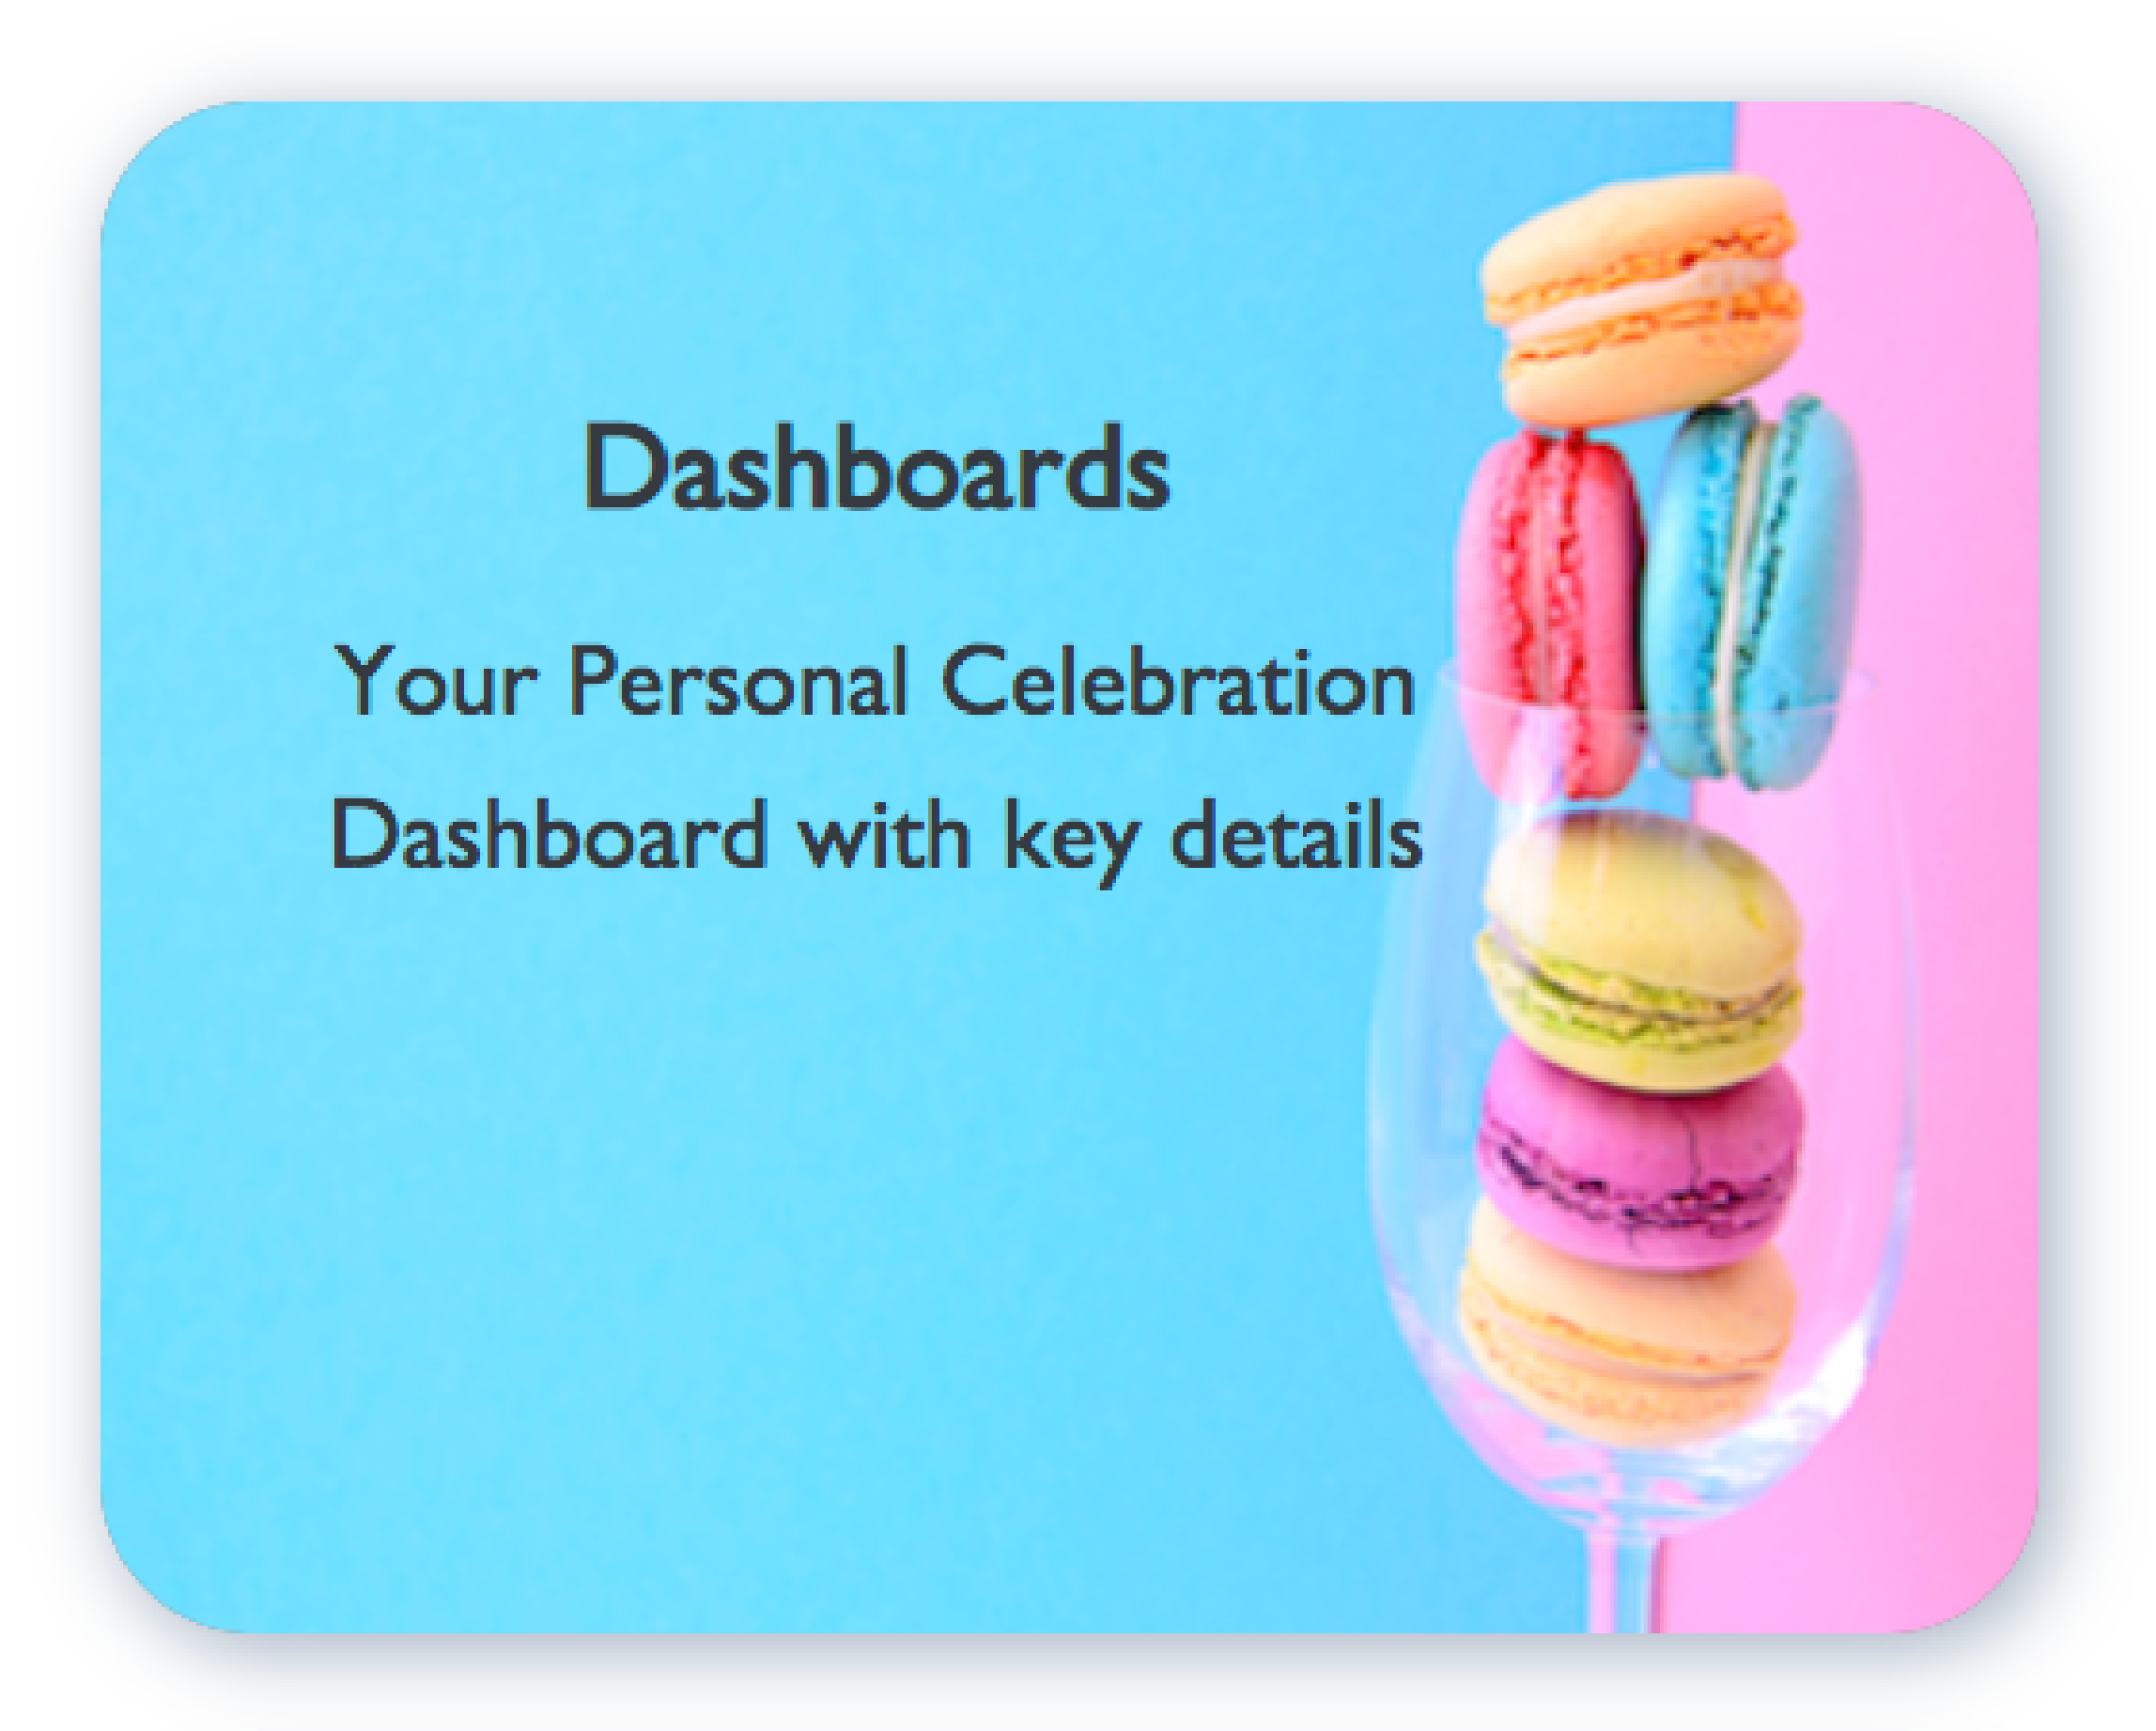 Personal Dashboard Page Quick view of key celebration details, countdown clock, RSVPS, To-Do’s  
